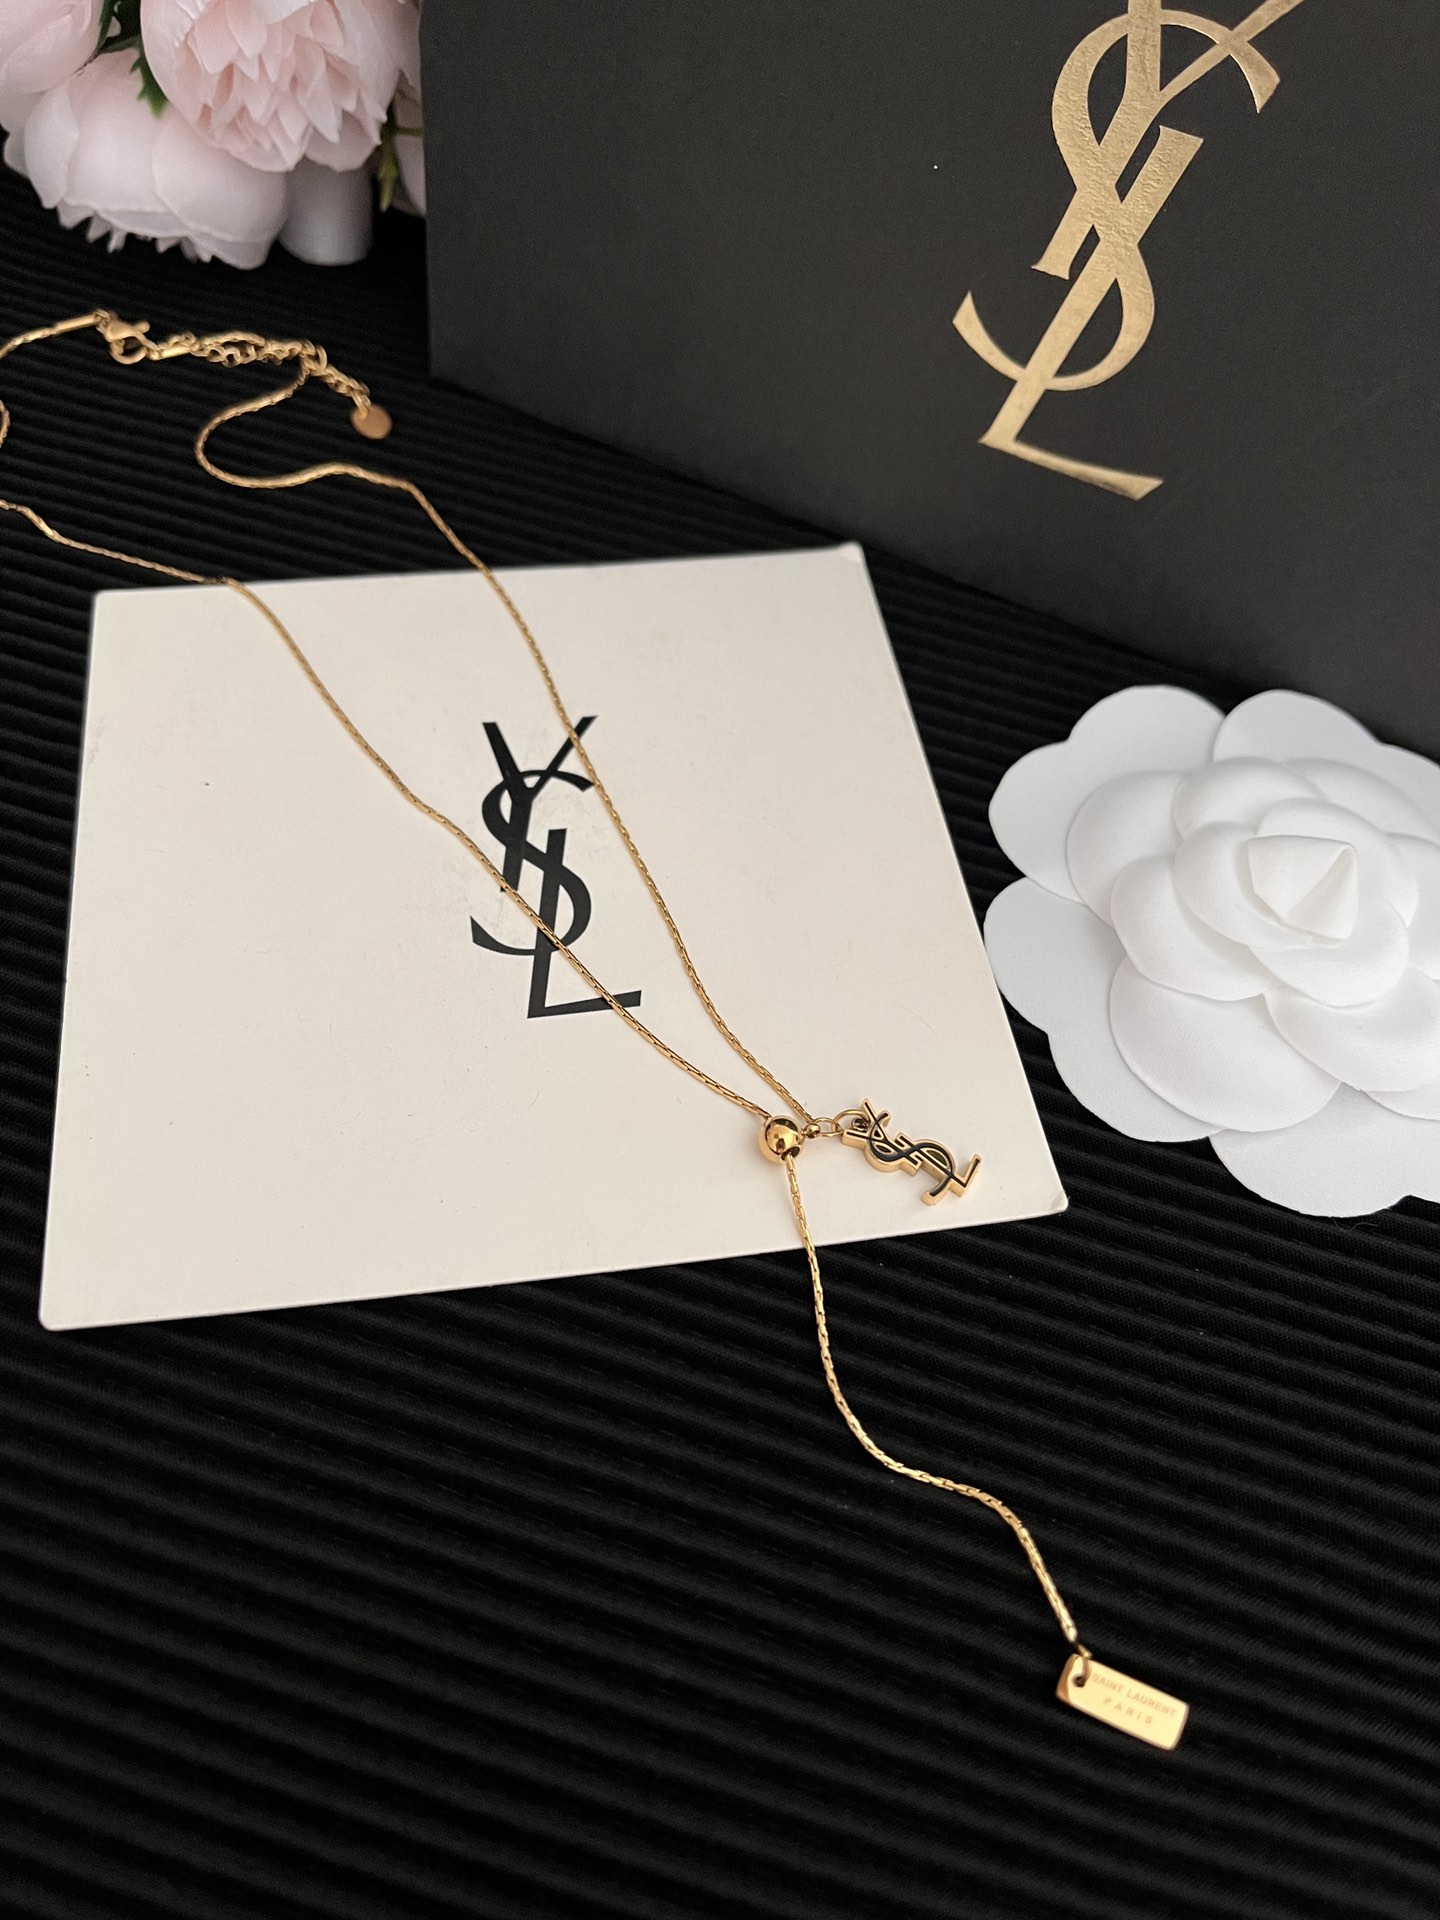 X537  YSL necklace